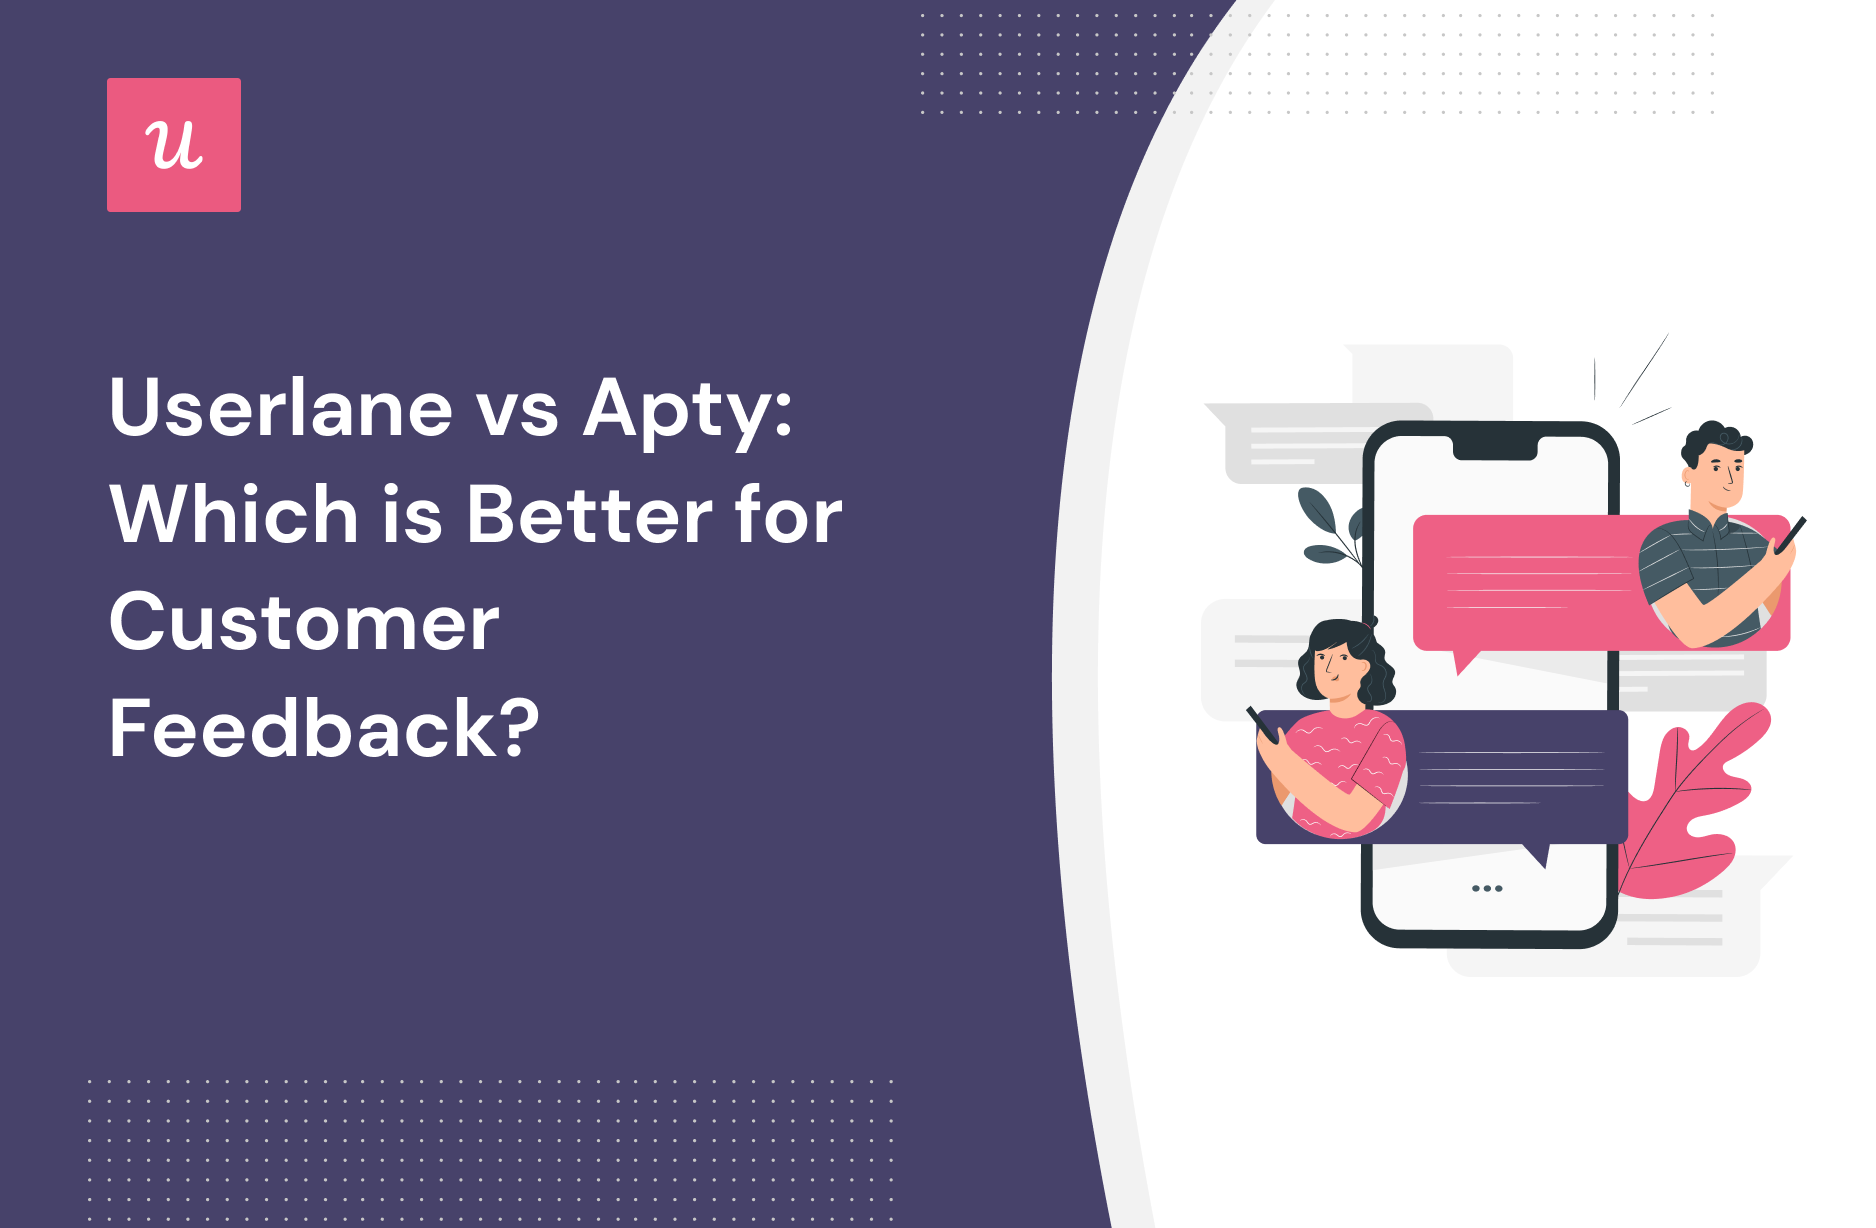 Userlane vs Apty: Which is Better for Customer Feedback?